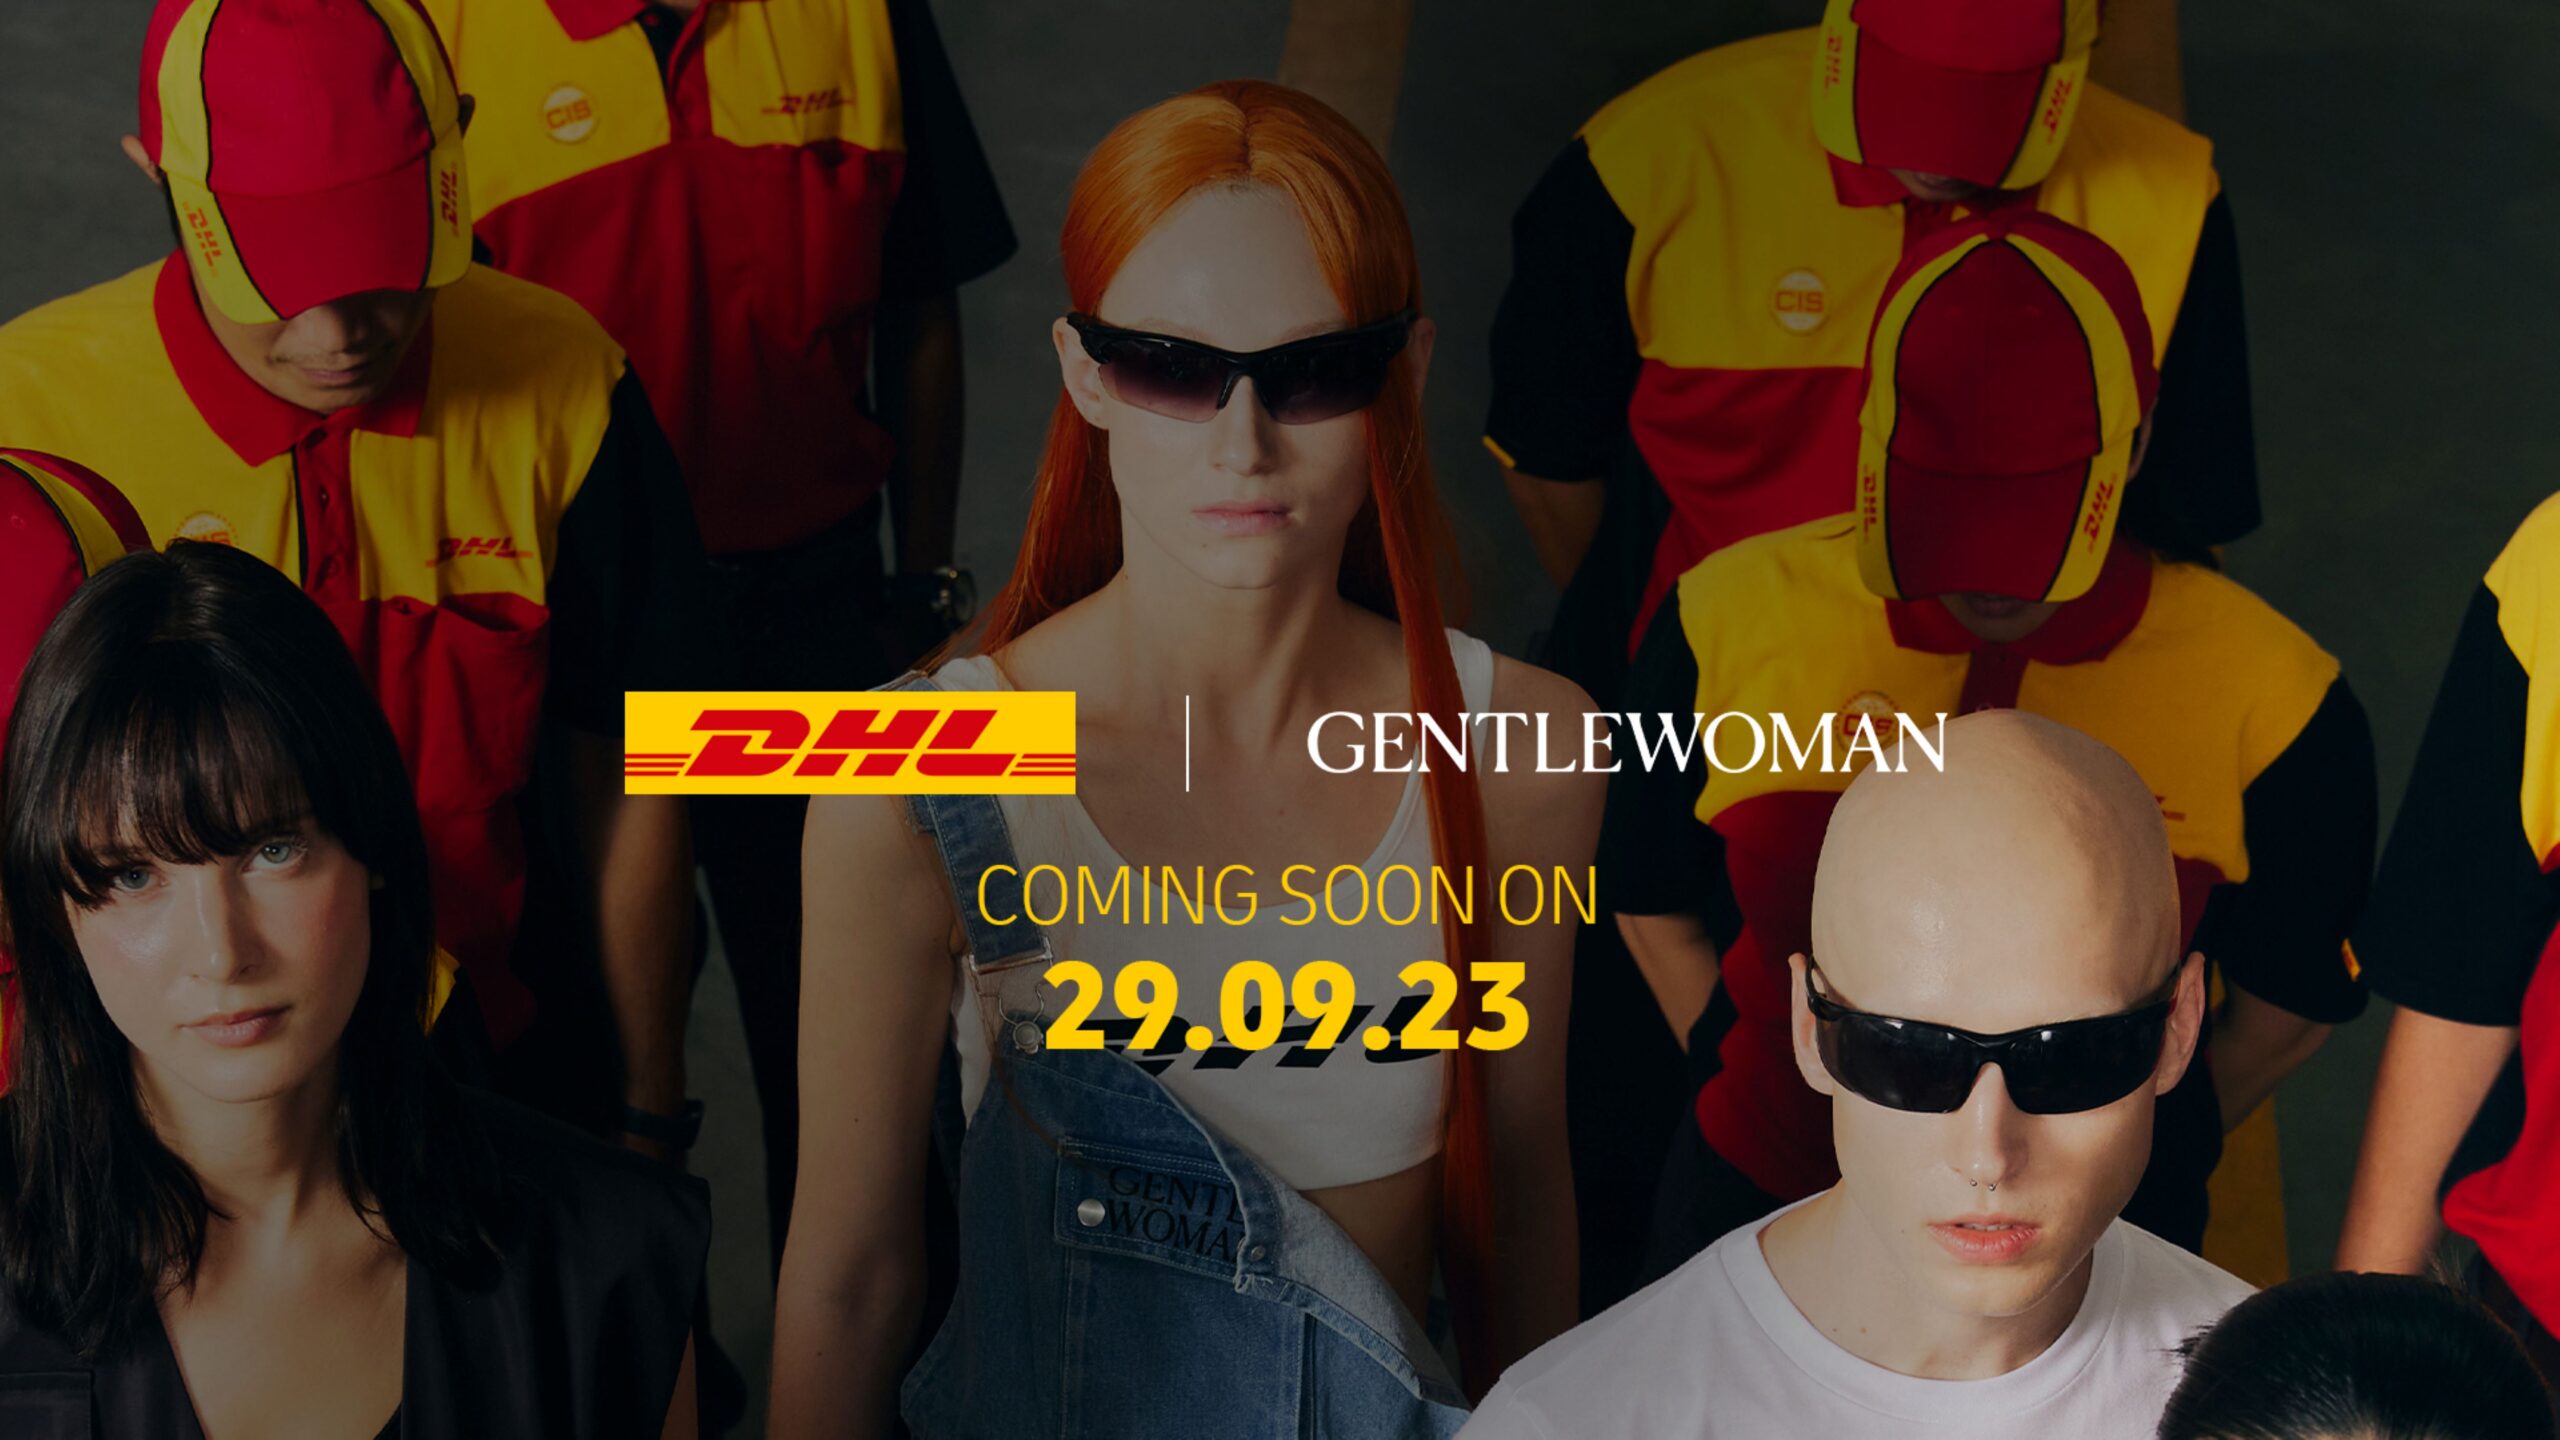 dhls timeless journey DHLxGENTLEWOMAN